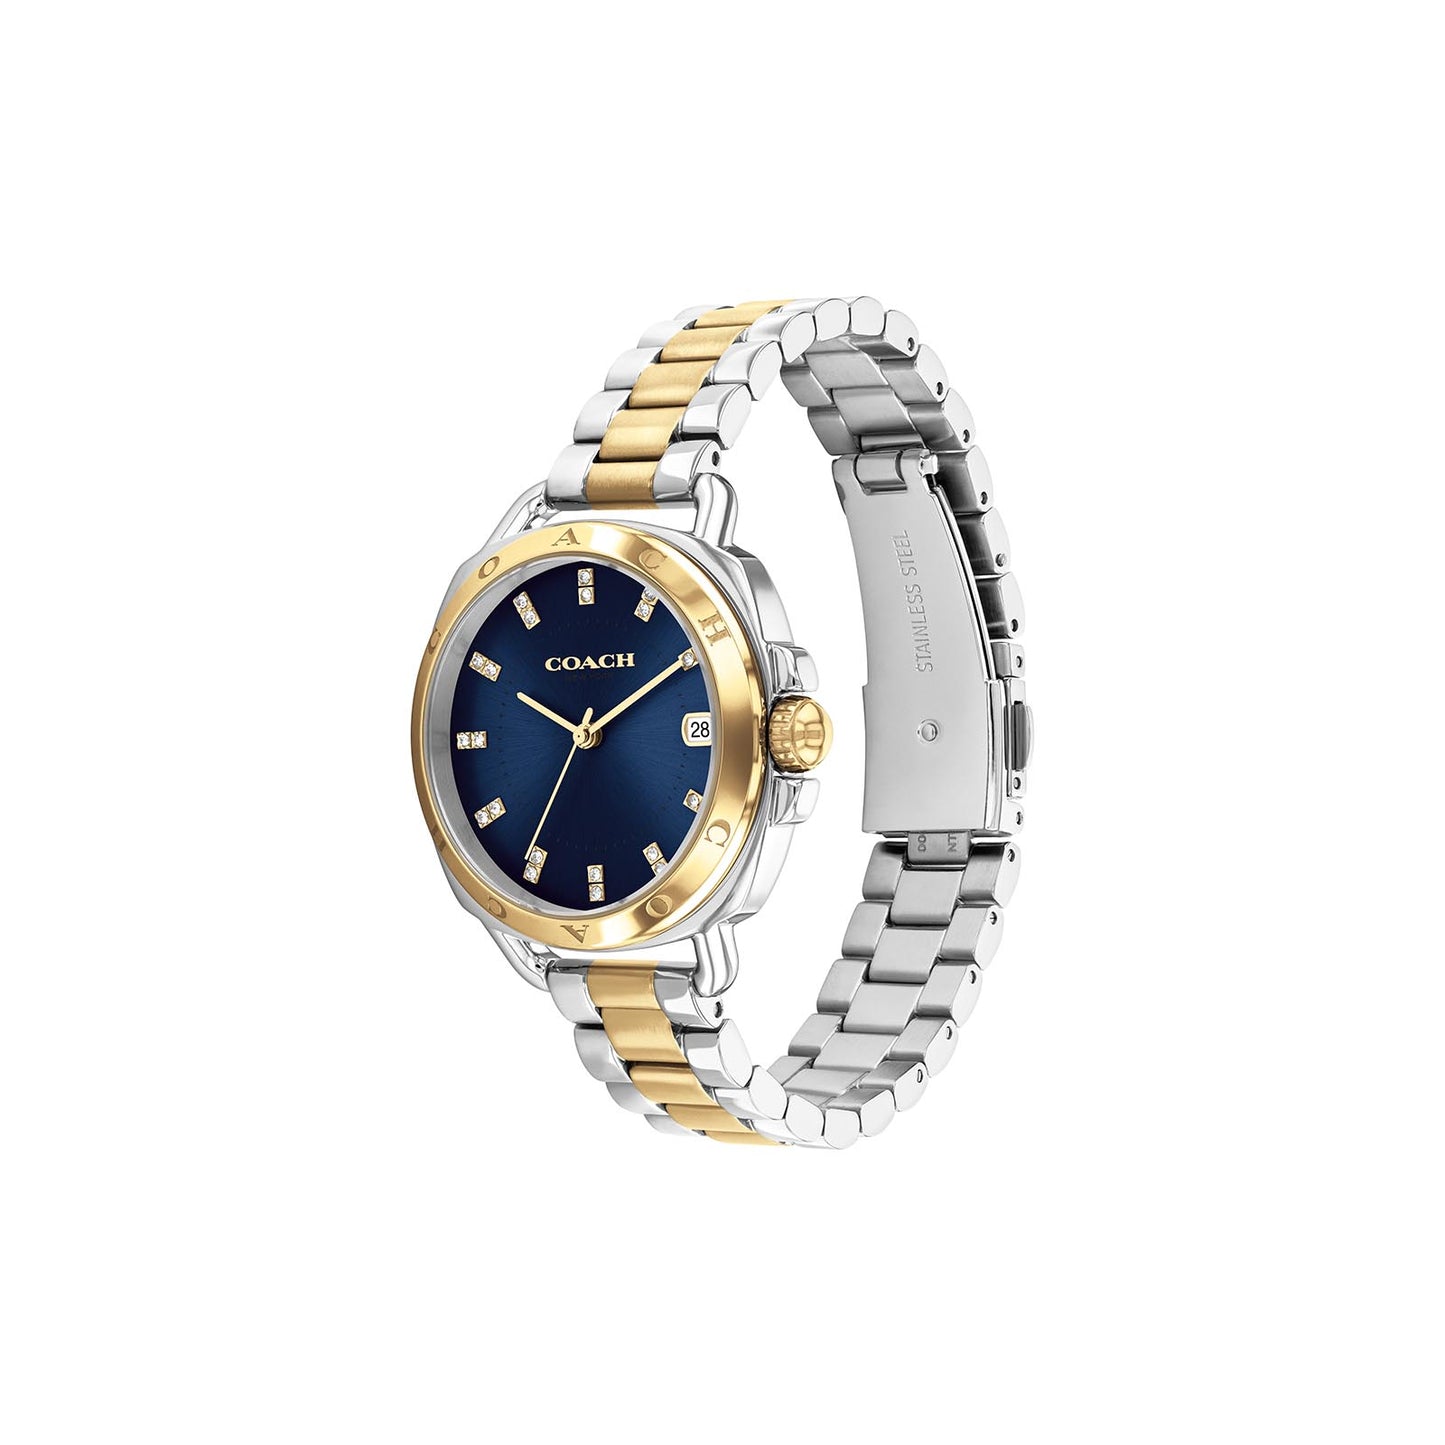 Coach 14504160 Women's Two-tone Gold & Stainless Steel Bracelet and Blue Dial Quartz Watch